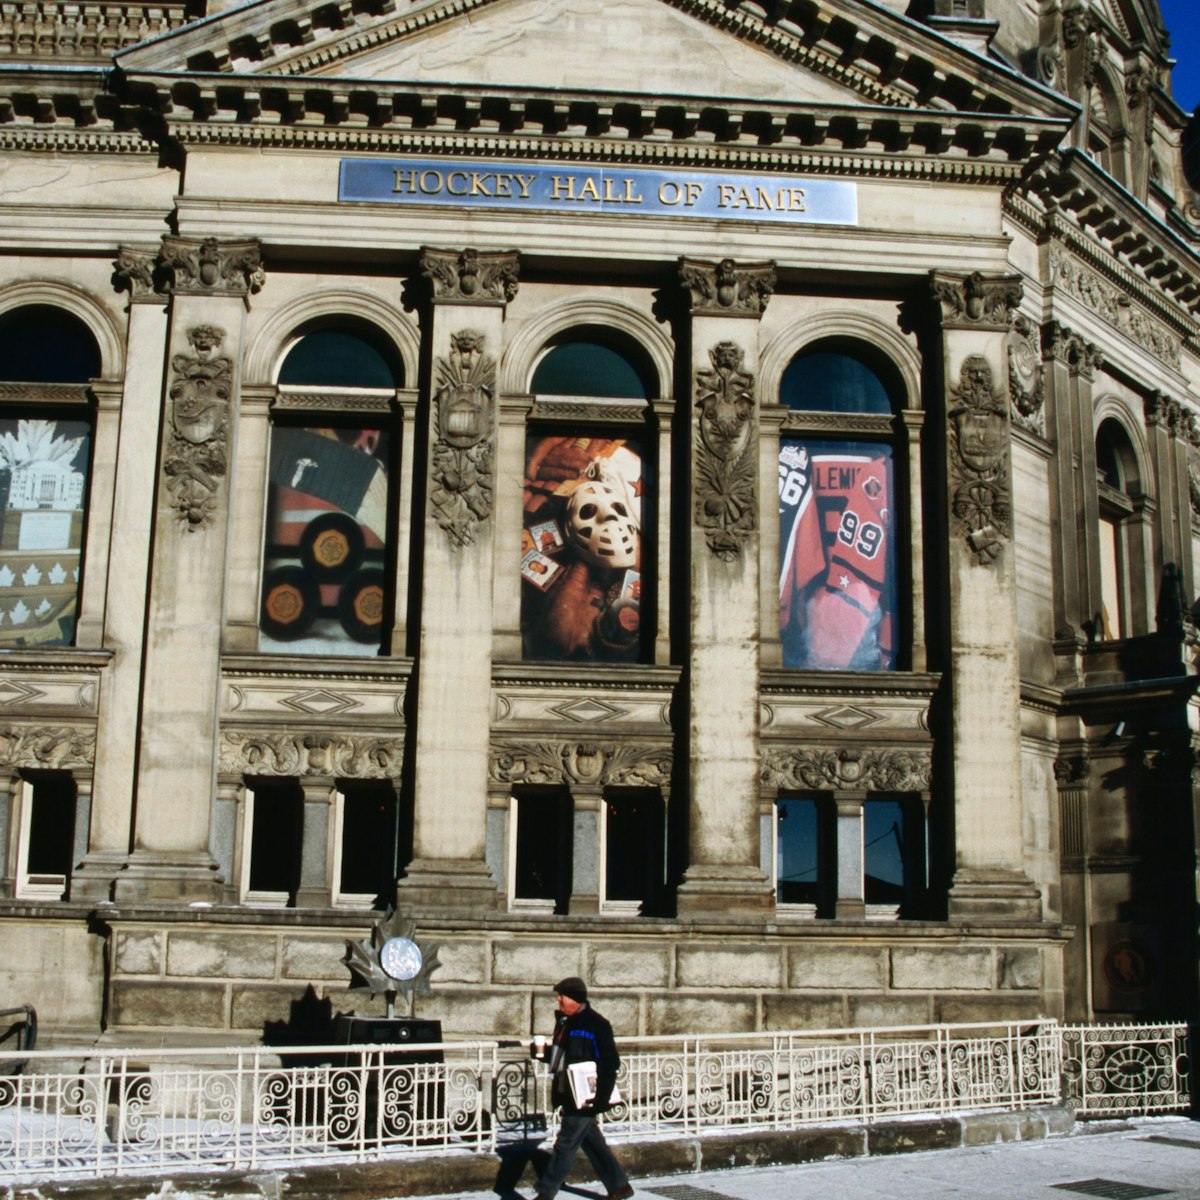 Exterior of Hockey Hall of Fame.